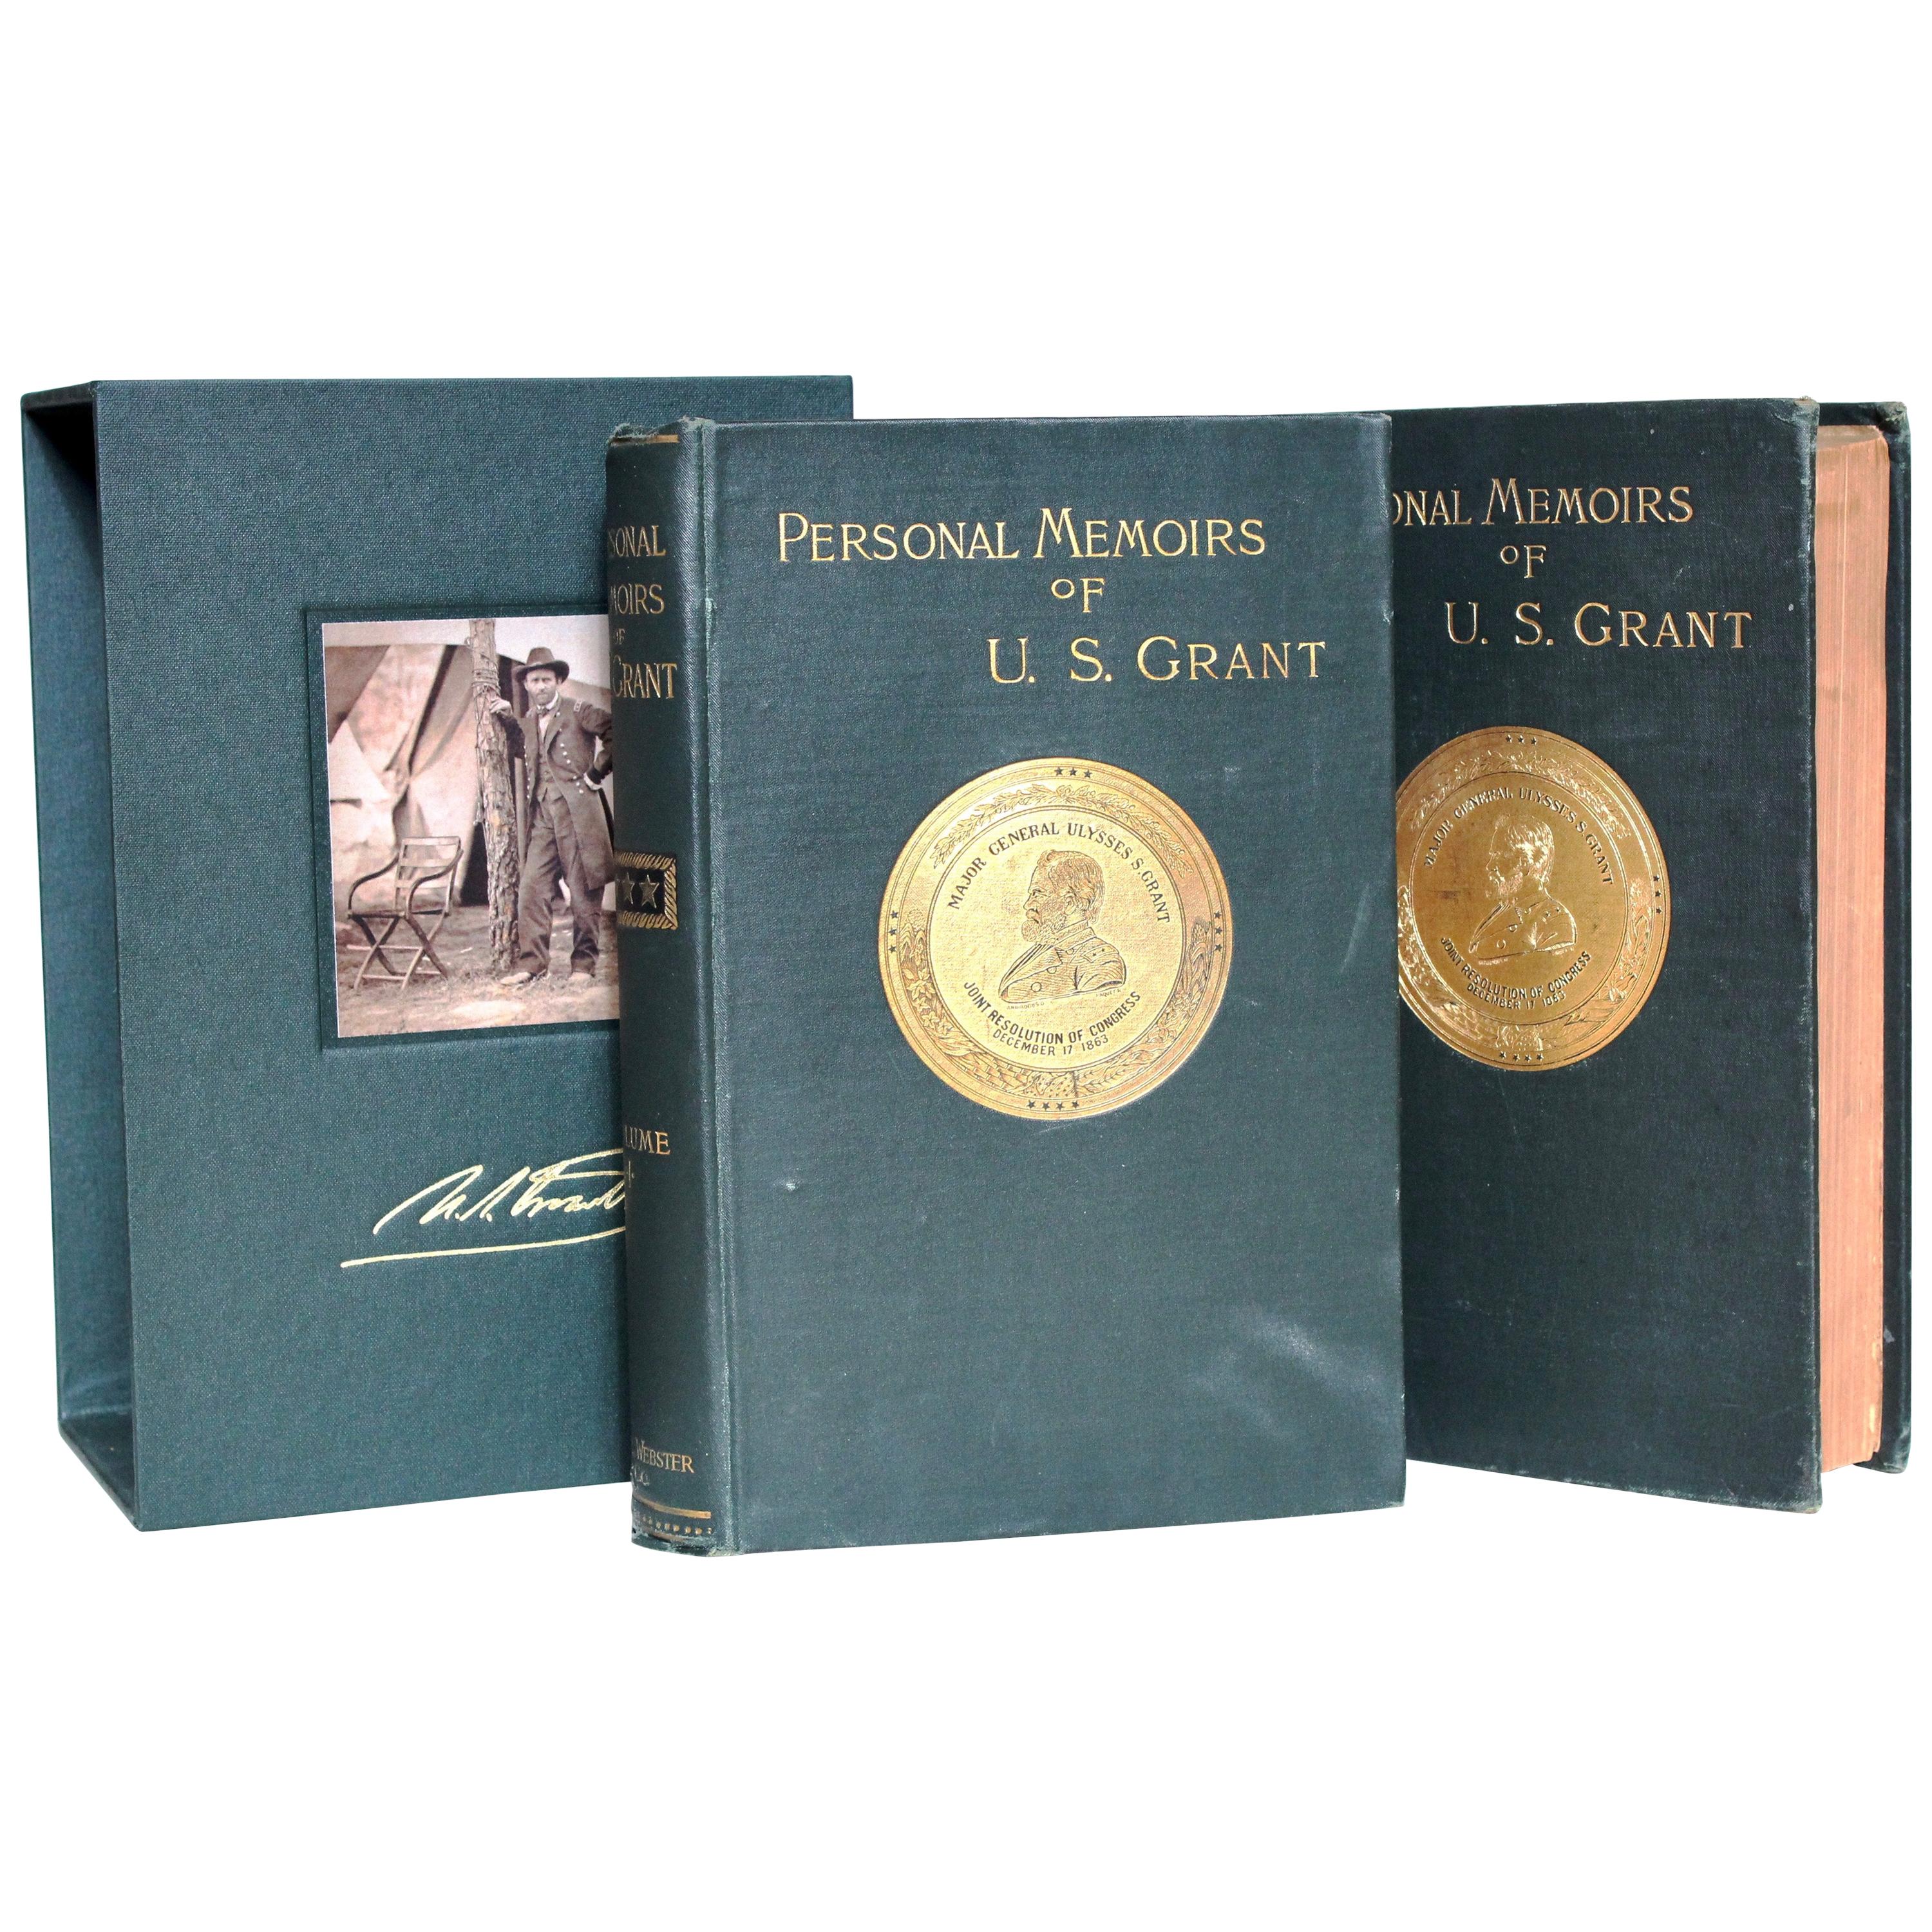 Personal Memoirs of U.S. Grant, First Edition, Two-Volume Set, circa 1885-1886